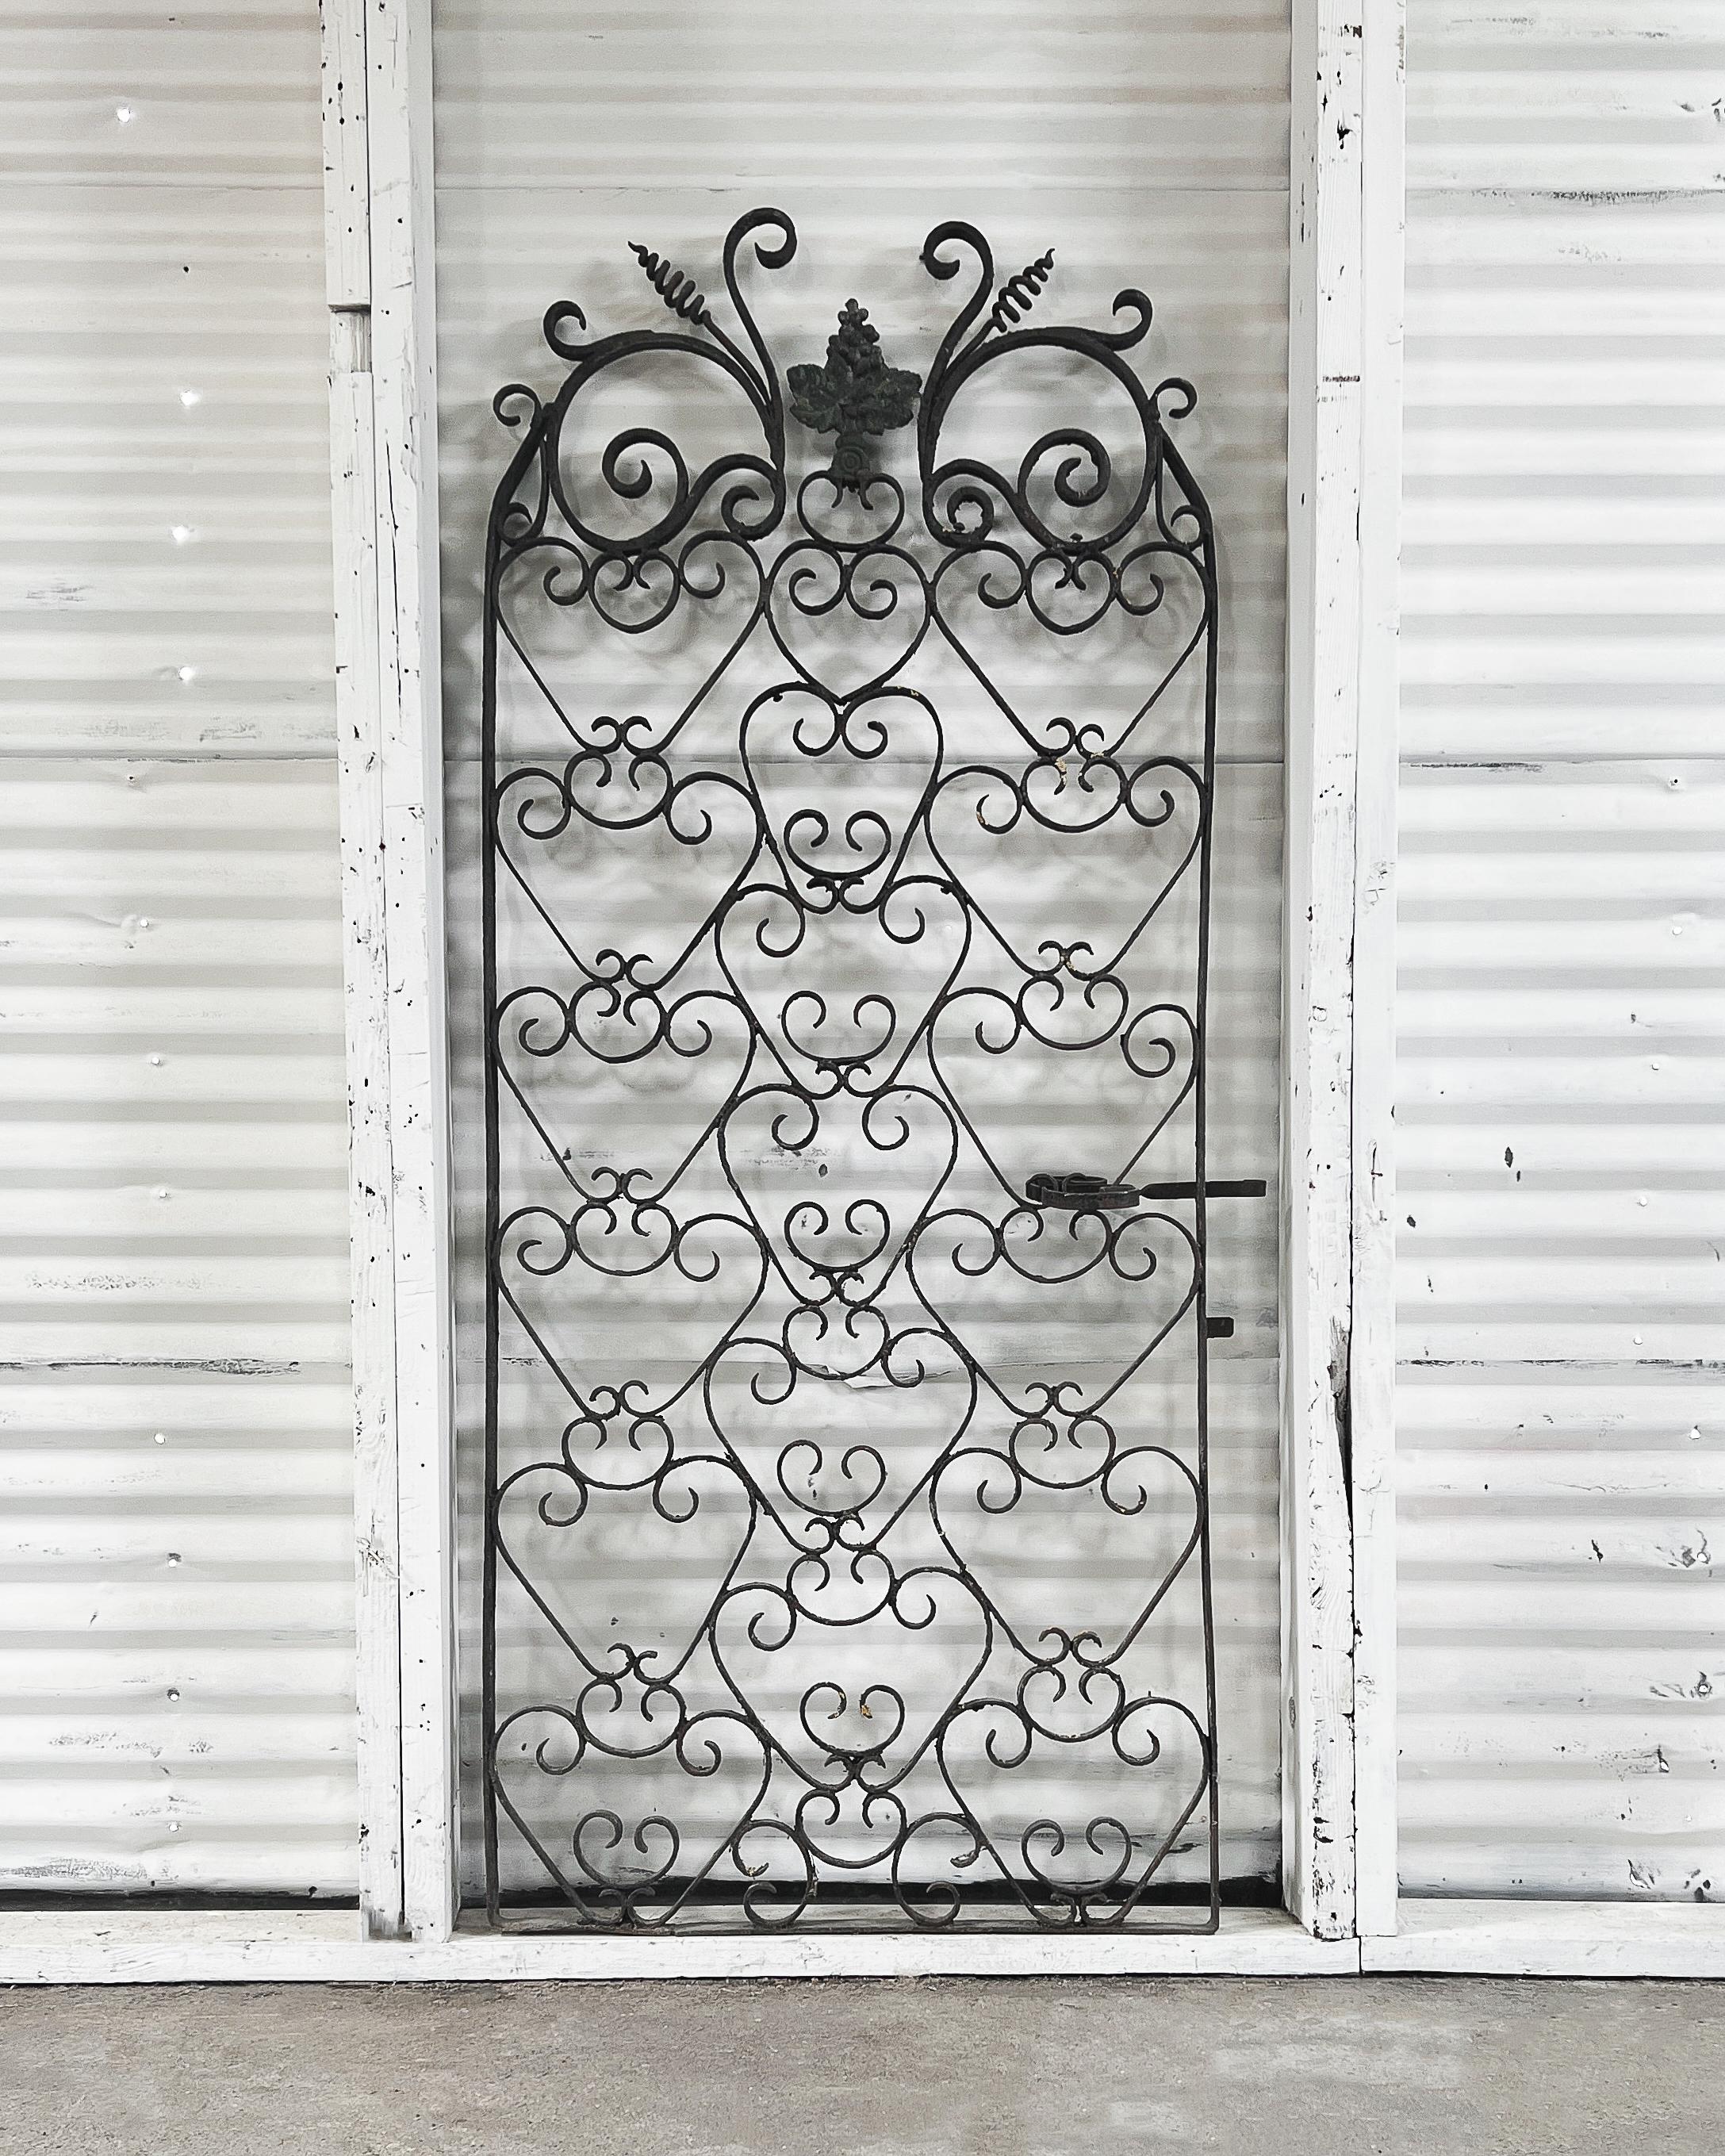 Found in France and crafted in the late 18th century, this beautiful wrought iron wine cellar gate has a wonderful time-worn patina. A wonderful decorative piece for the home, the gate features decorative scrollwork and is topped with a leafy